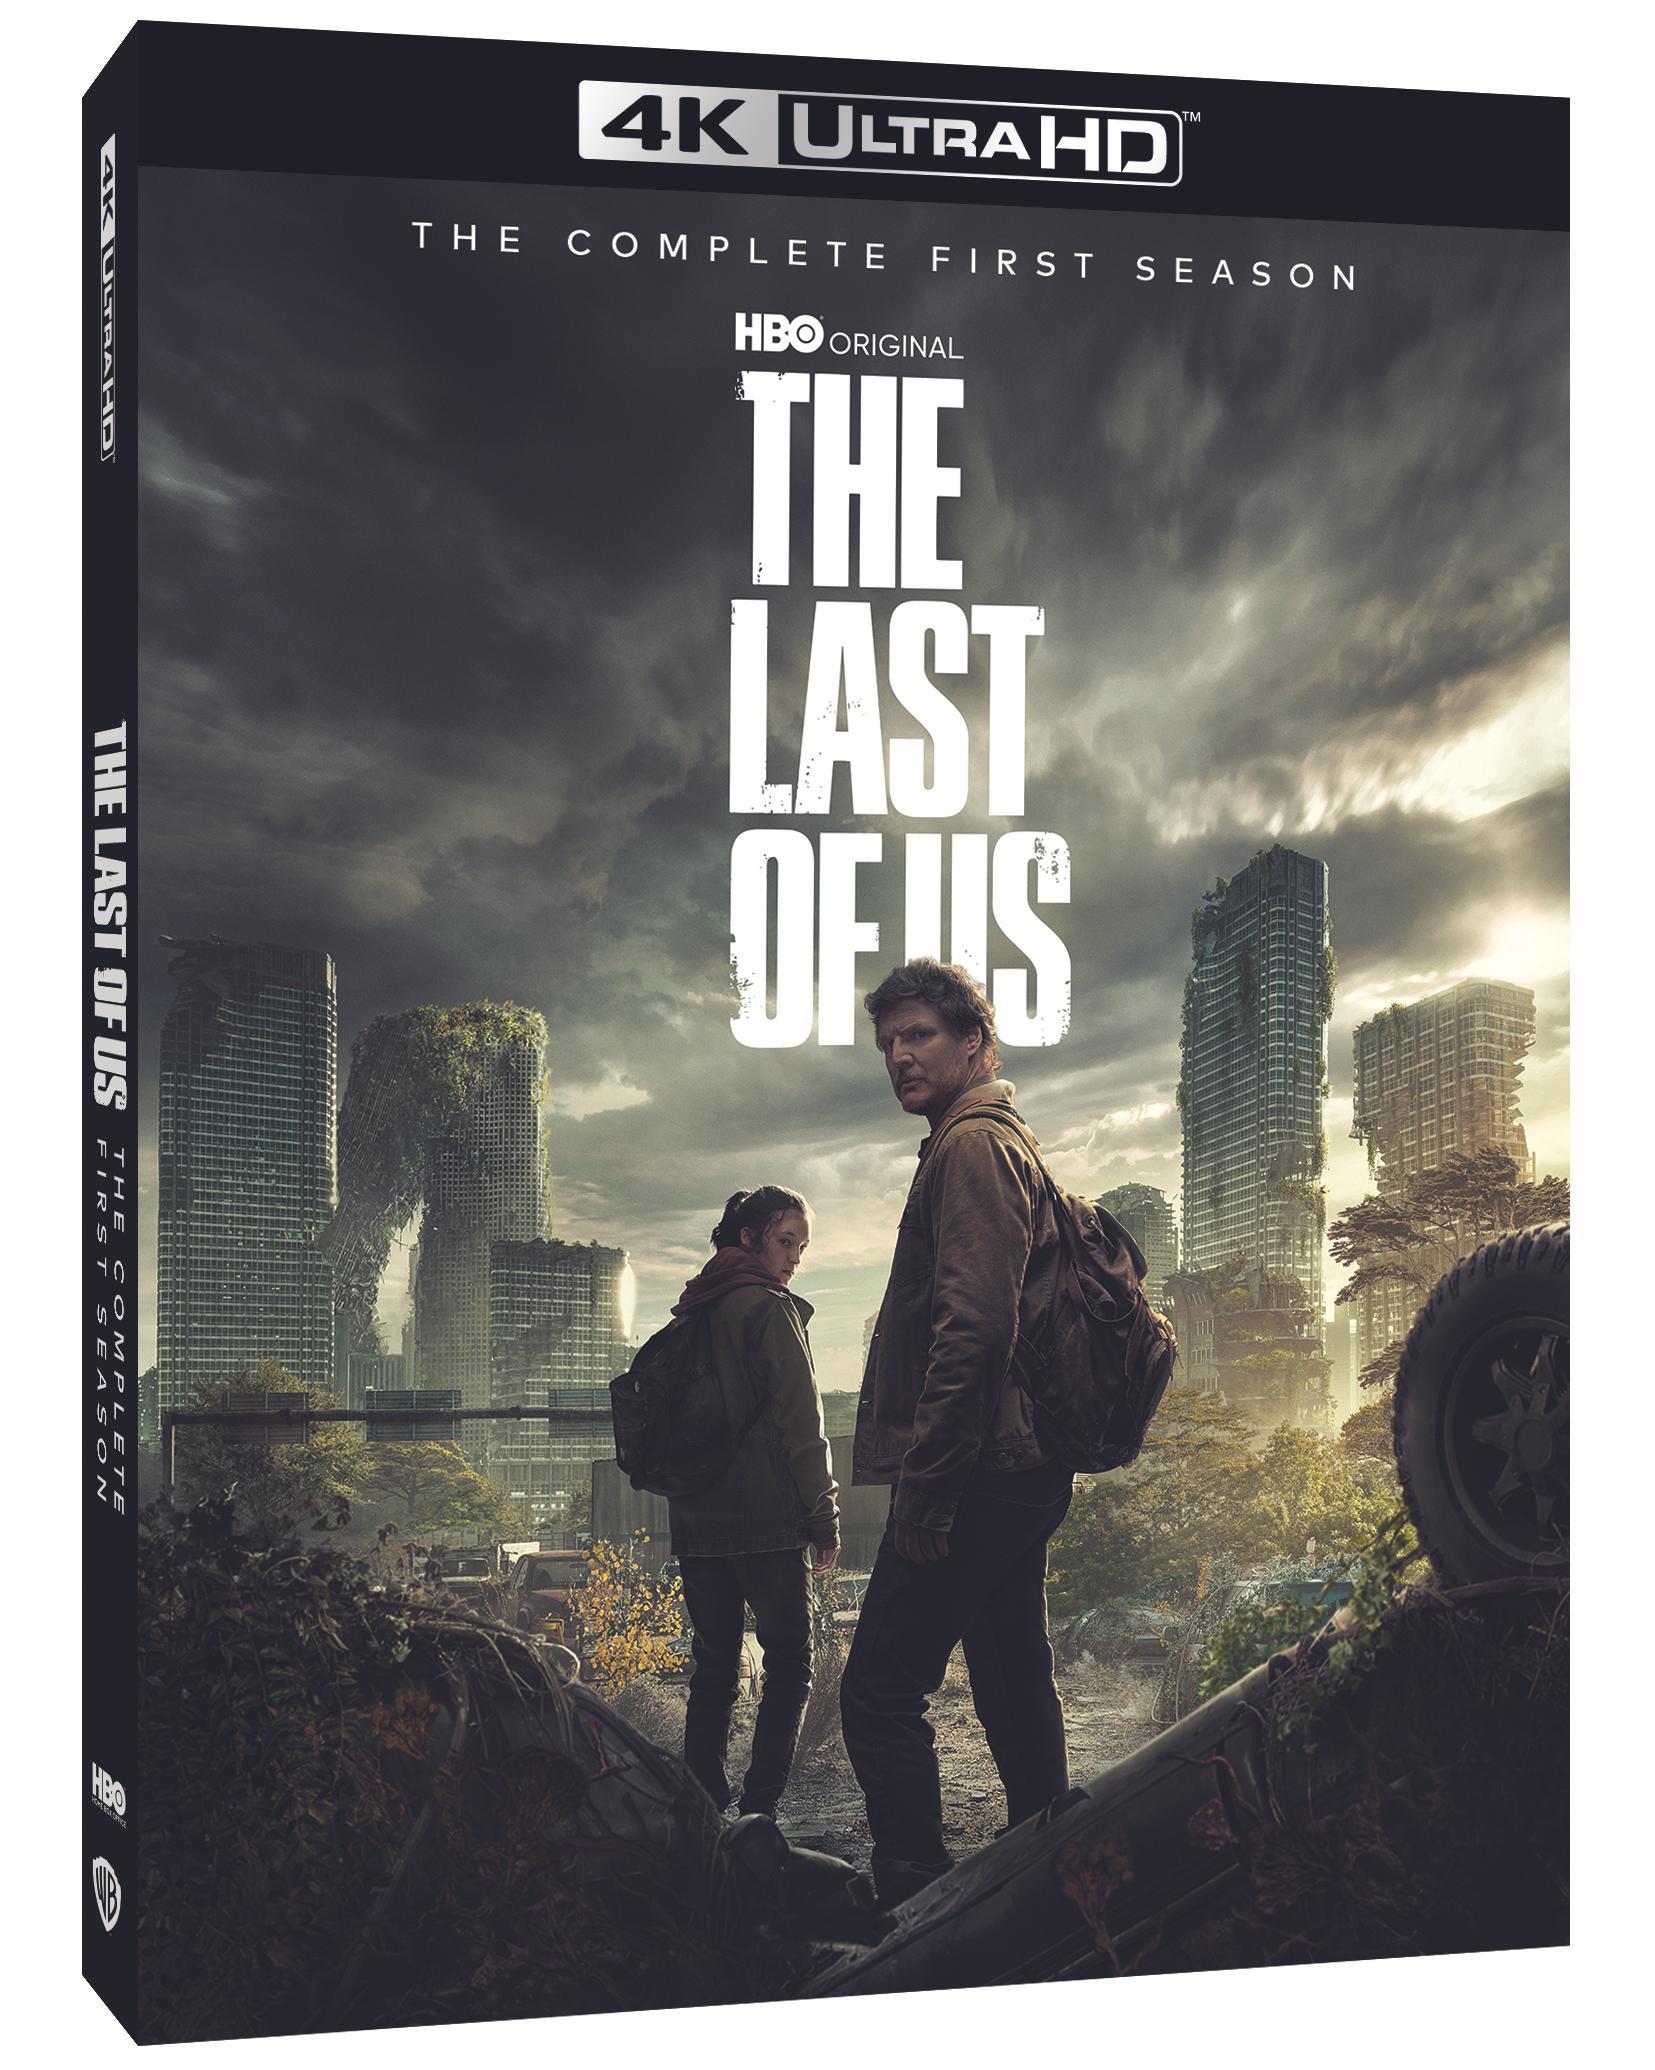 The Last of Us First Reviews: 'Best Video Game Adaptation Ever Made,'  Critics Say